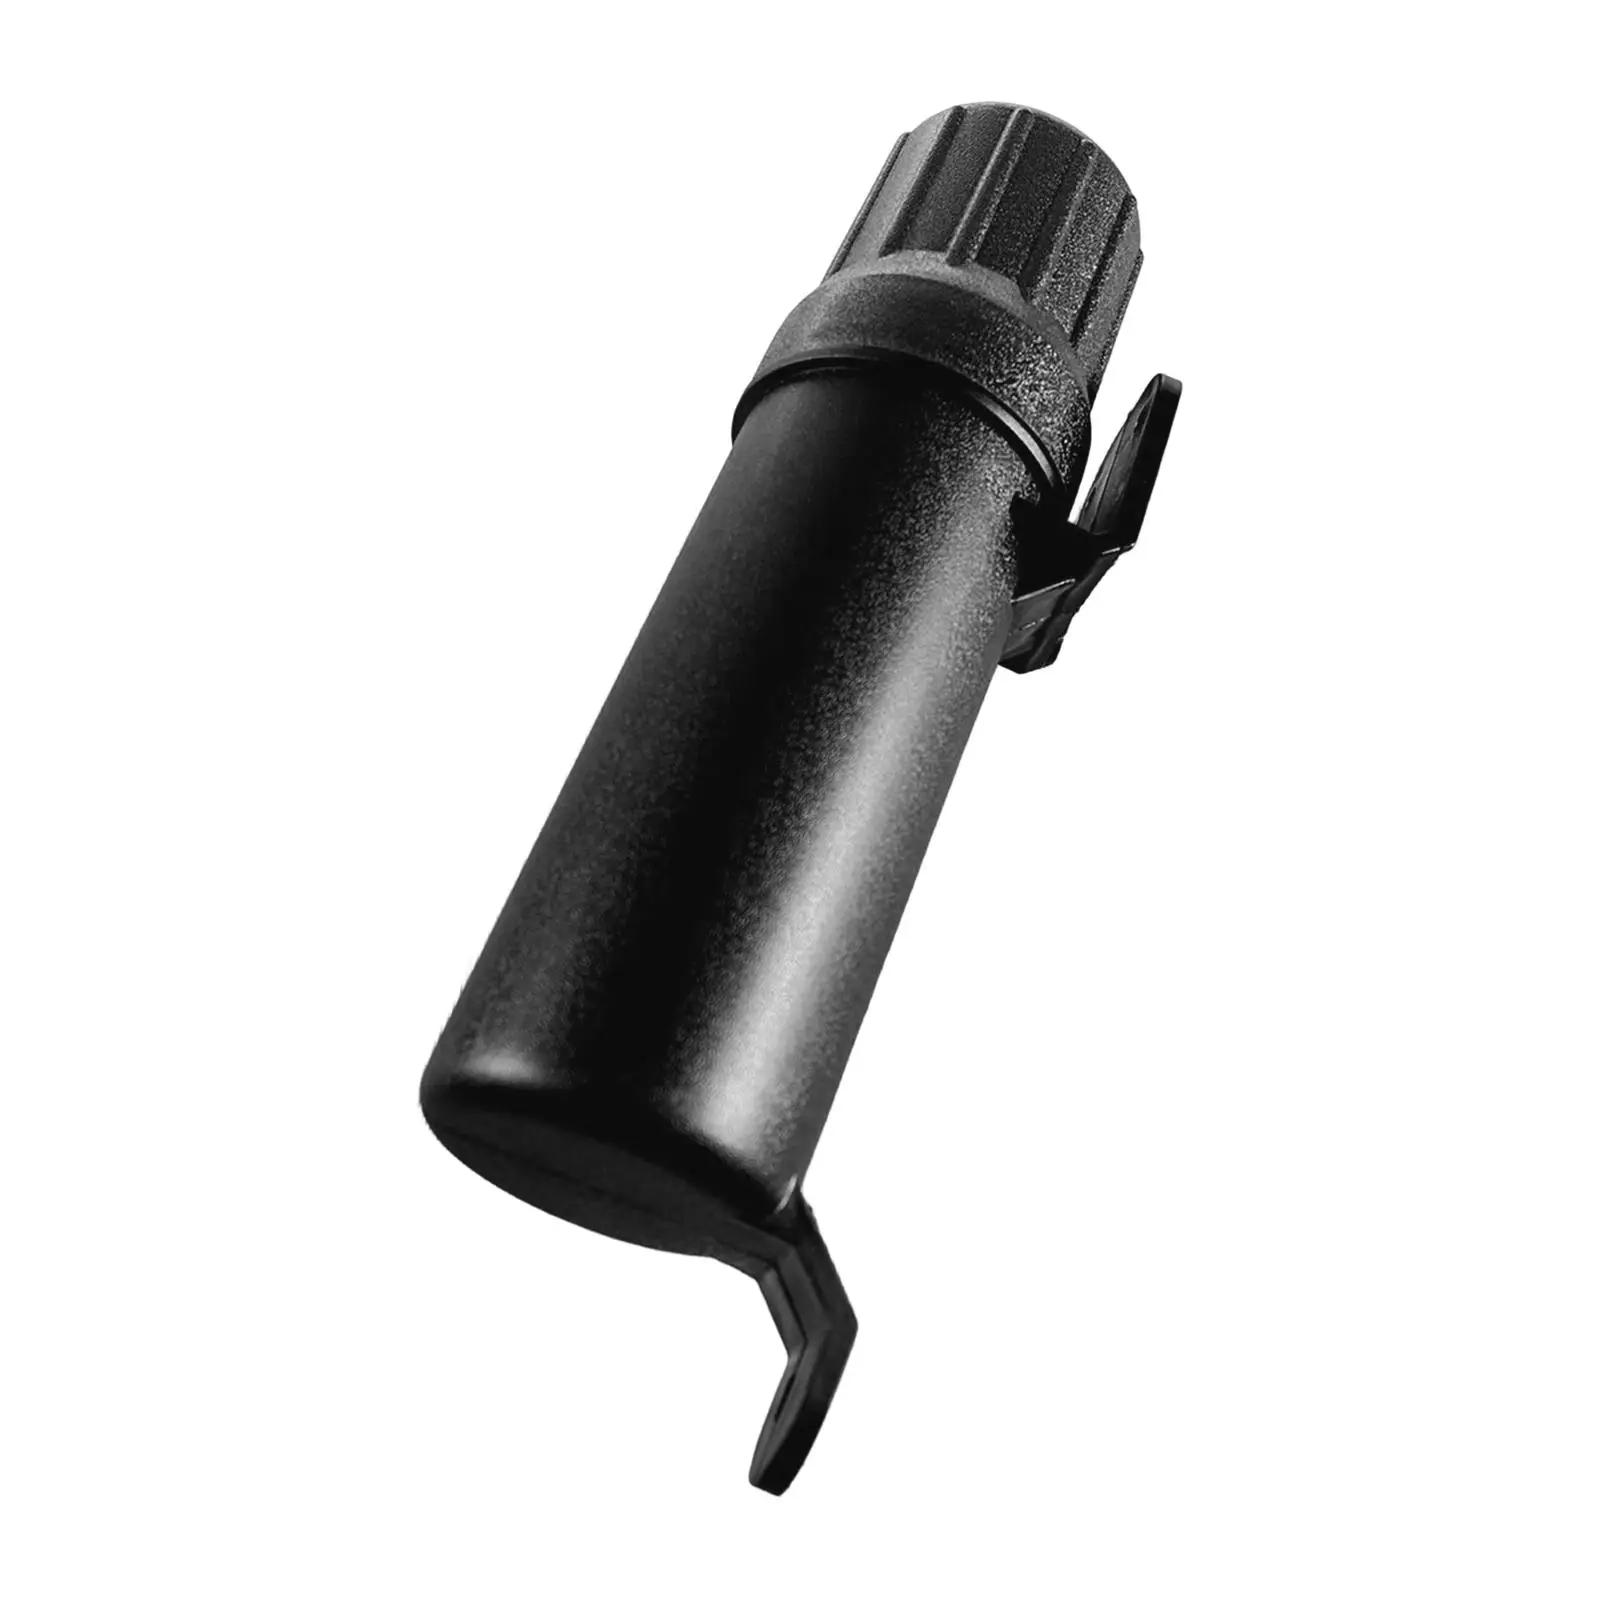 Universal Motorcycle Tool Tube Waterproof Replaces Gloves Storage Box Spare Parts Professional Storage Canister Sturdy DIY for